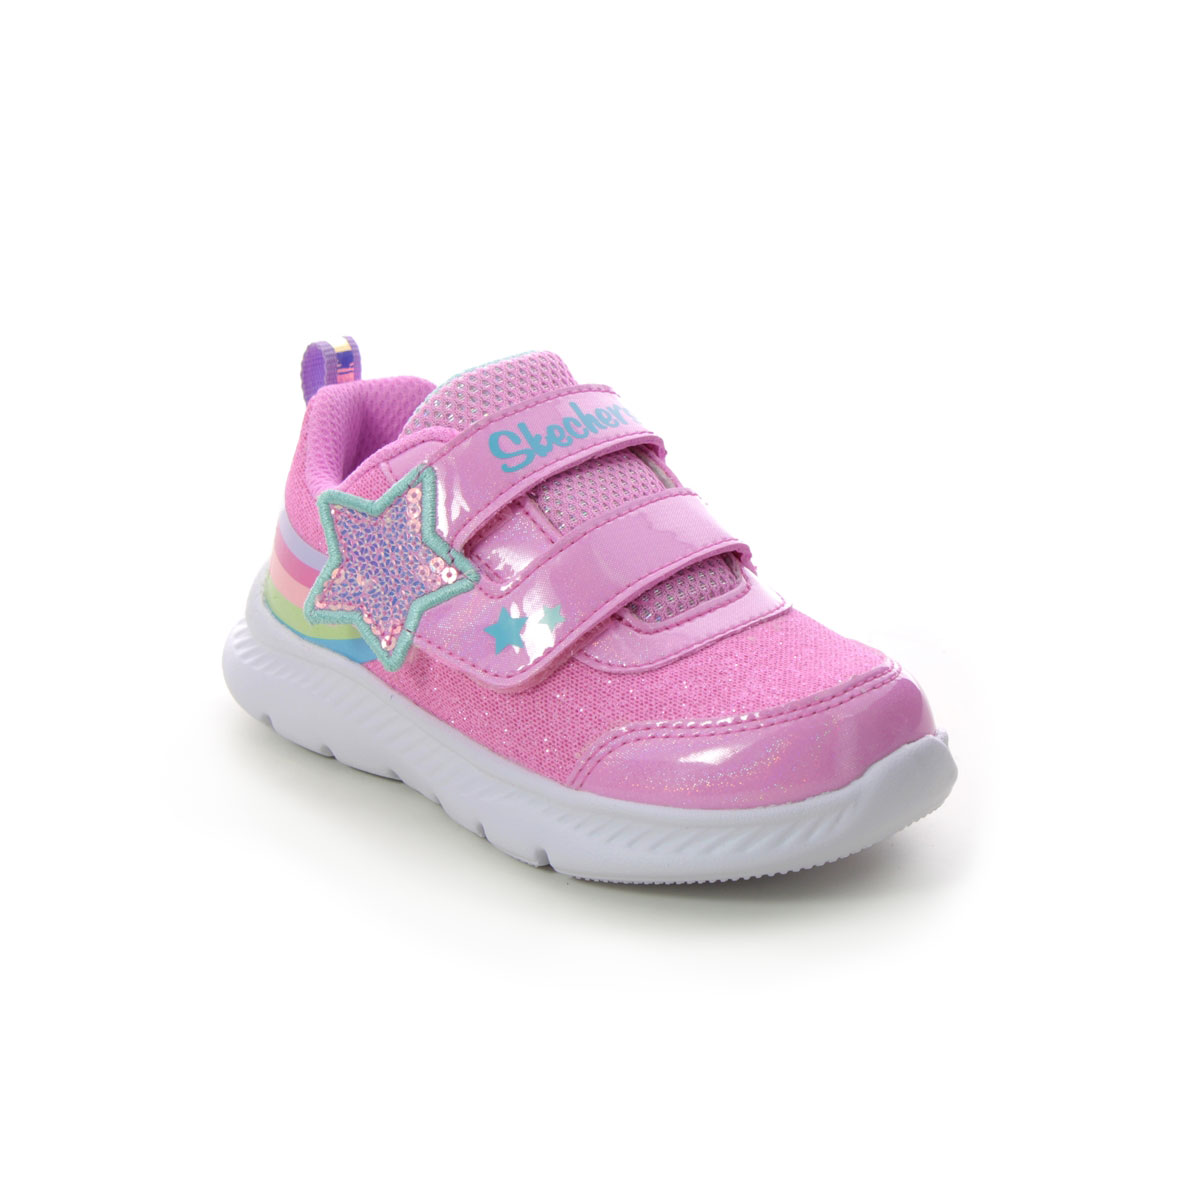 Skechers Comfy Flex Velcro Pink Kids Girls Trainers 302711N In Size 21 In Plain Pink For kids